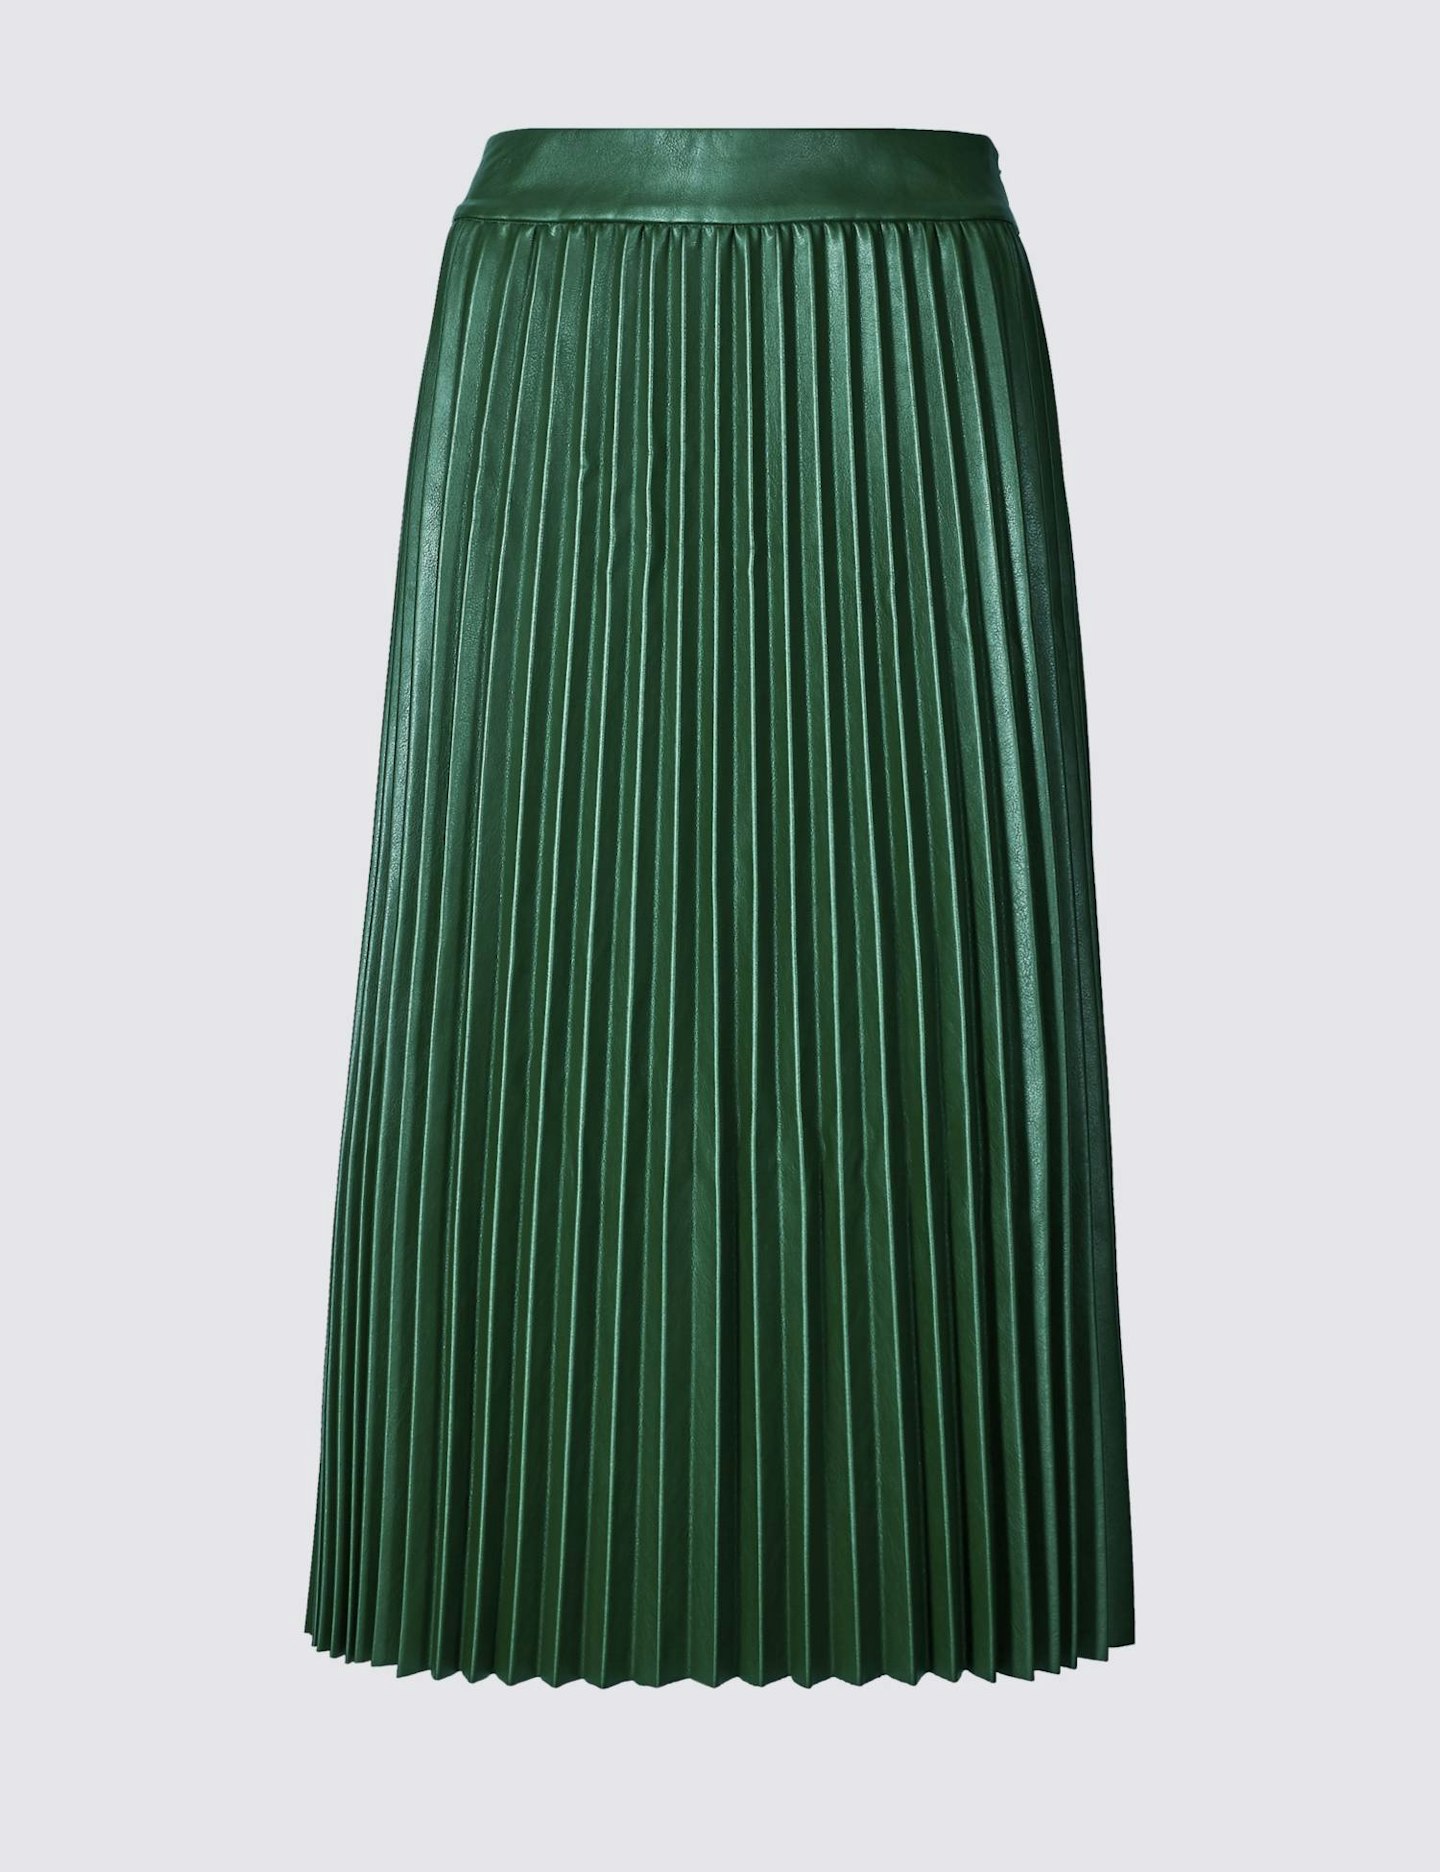 M&S Collection, Faux Leather Pleated Midi Skirt, £39.50